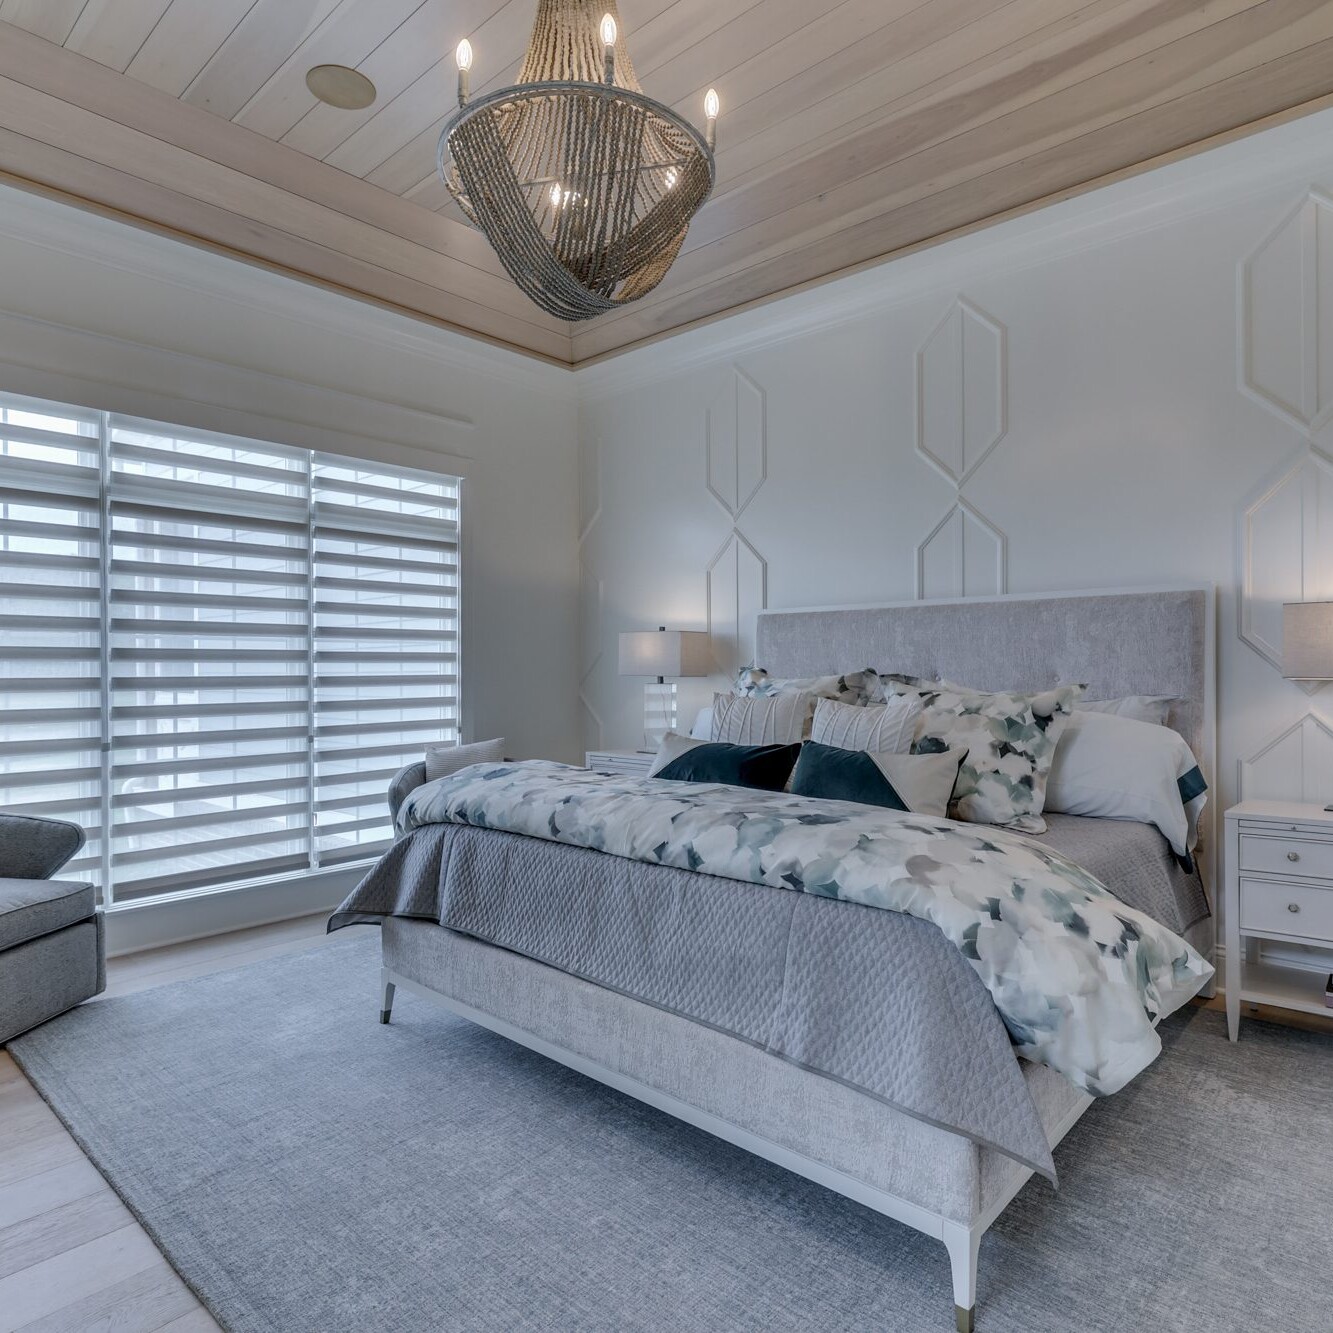 A bedroom with wood ceilings and a white bed.